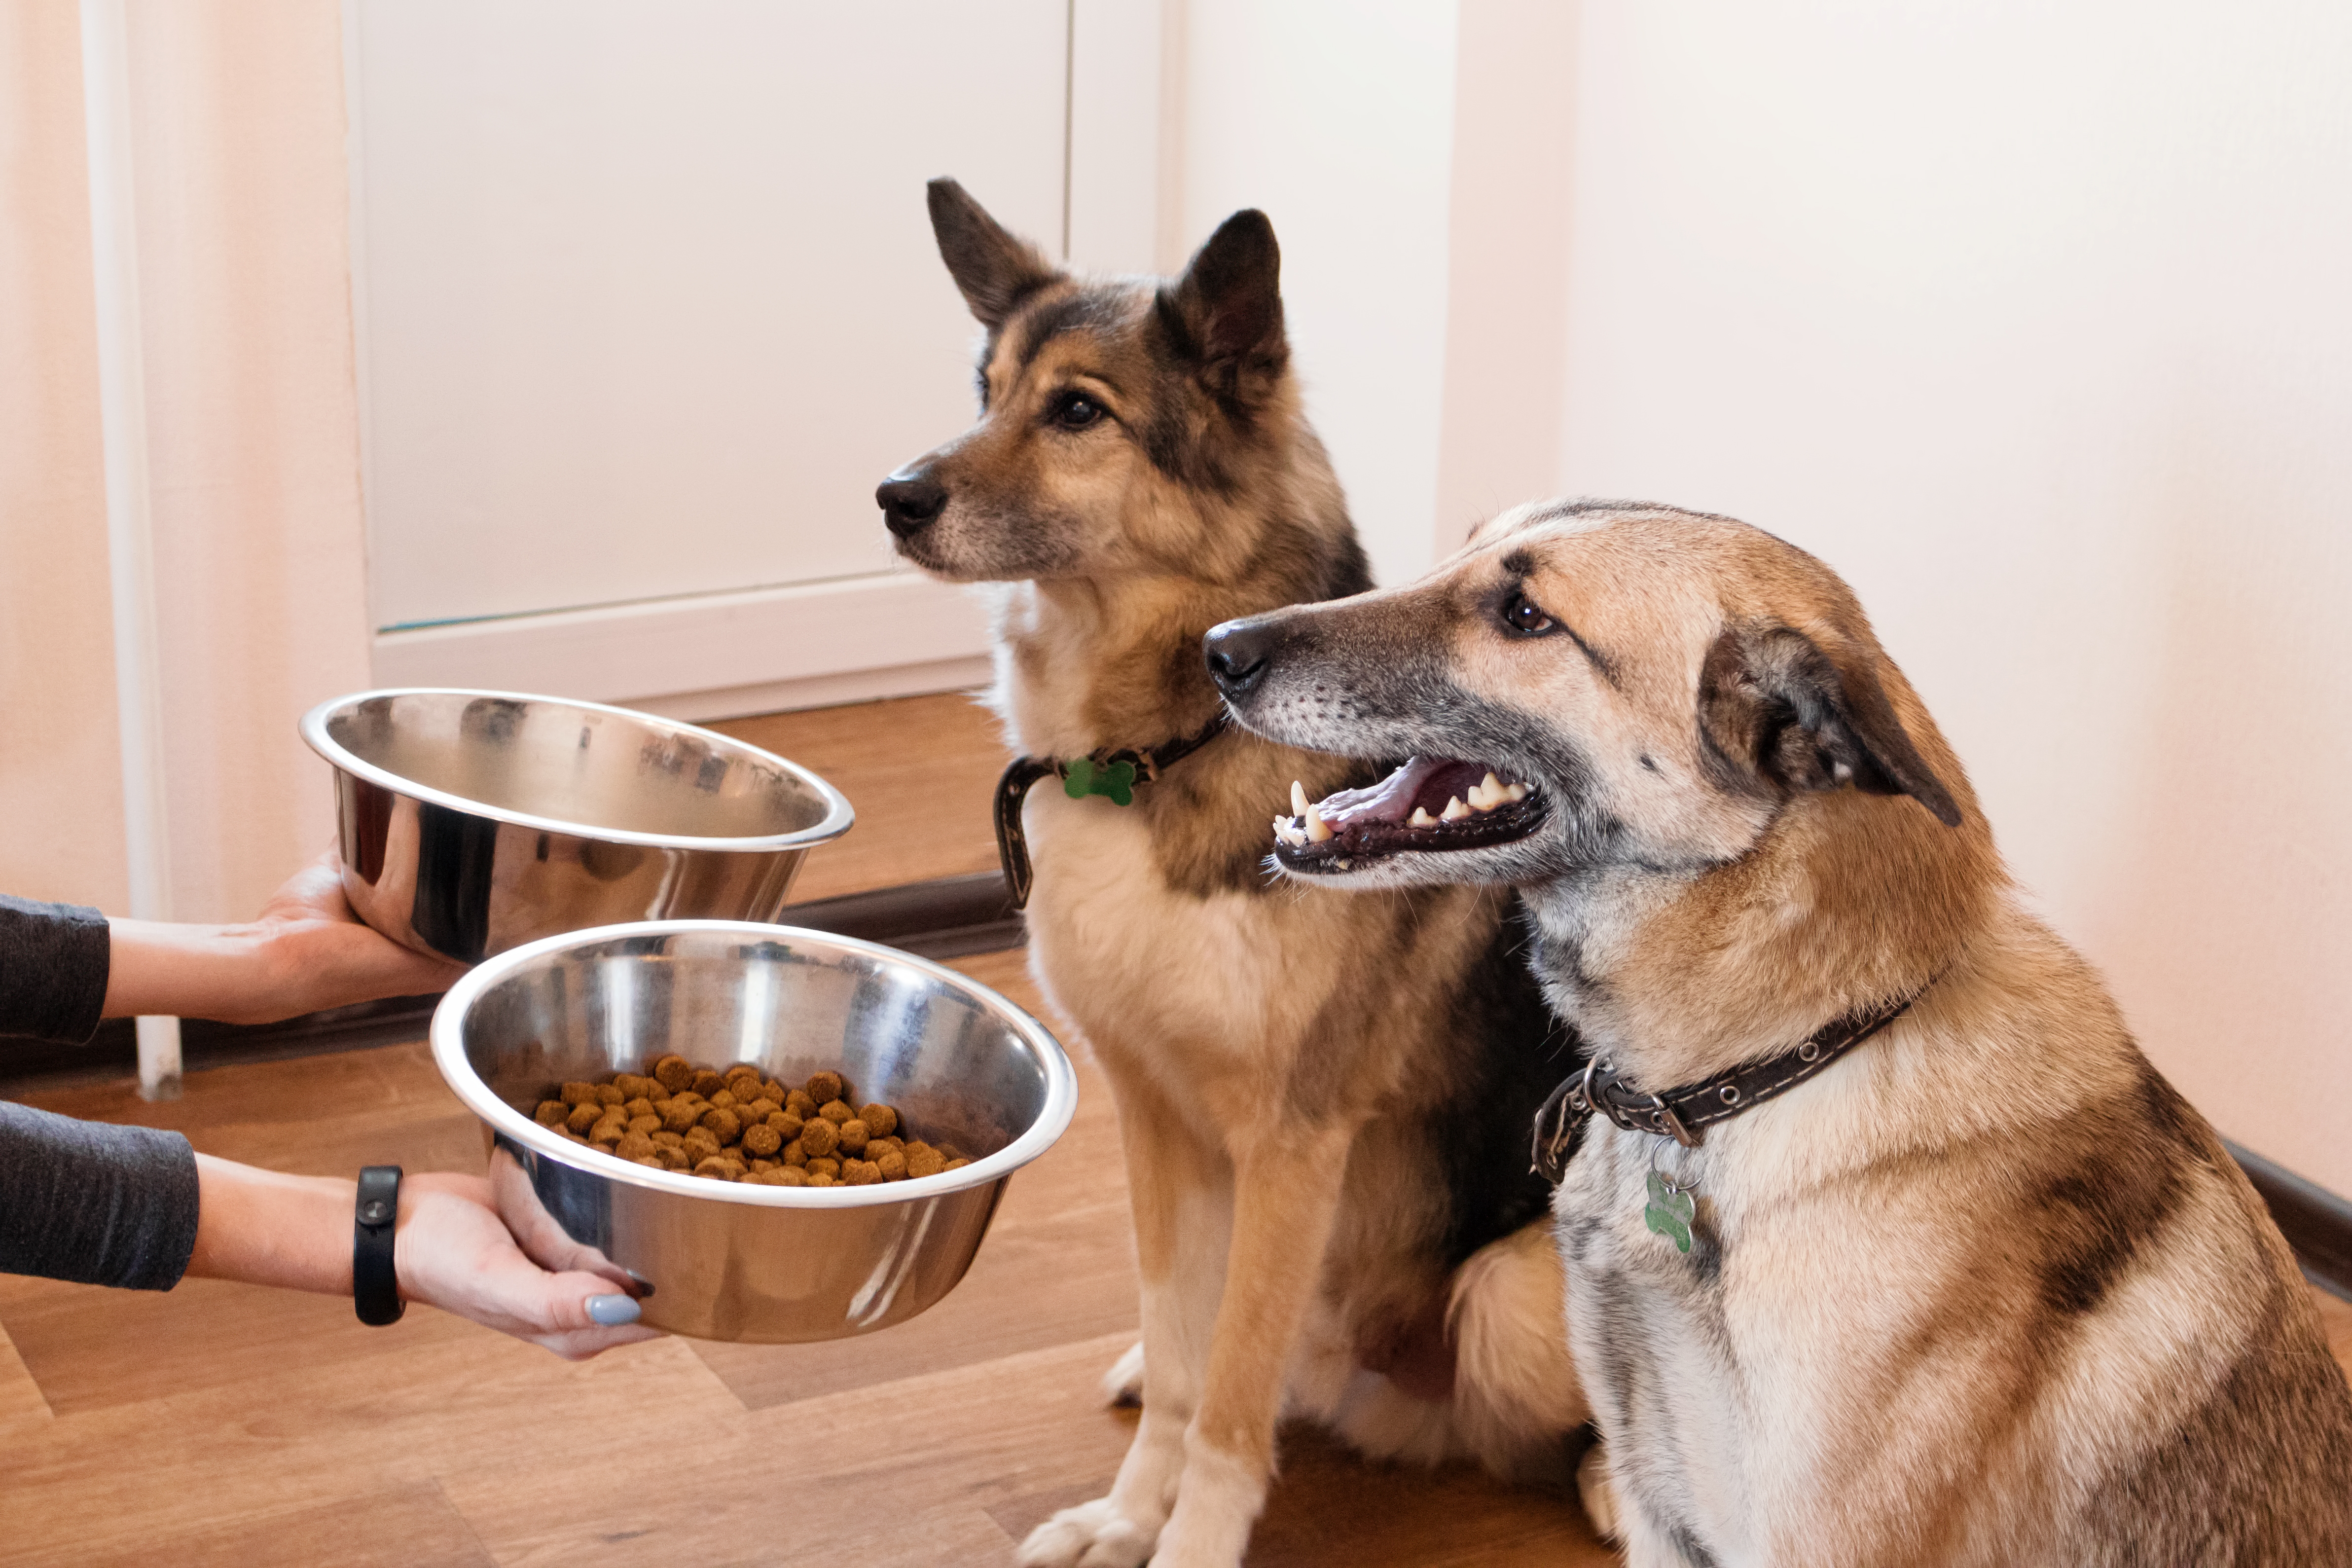 are grain free treats better for dogs